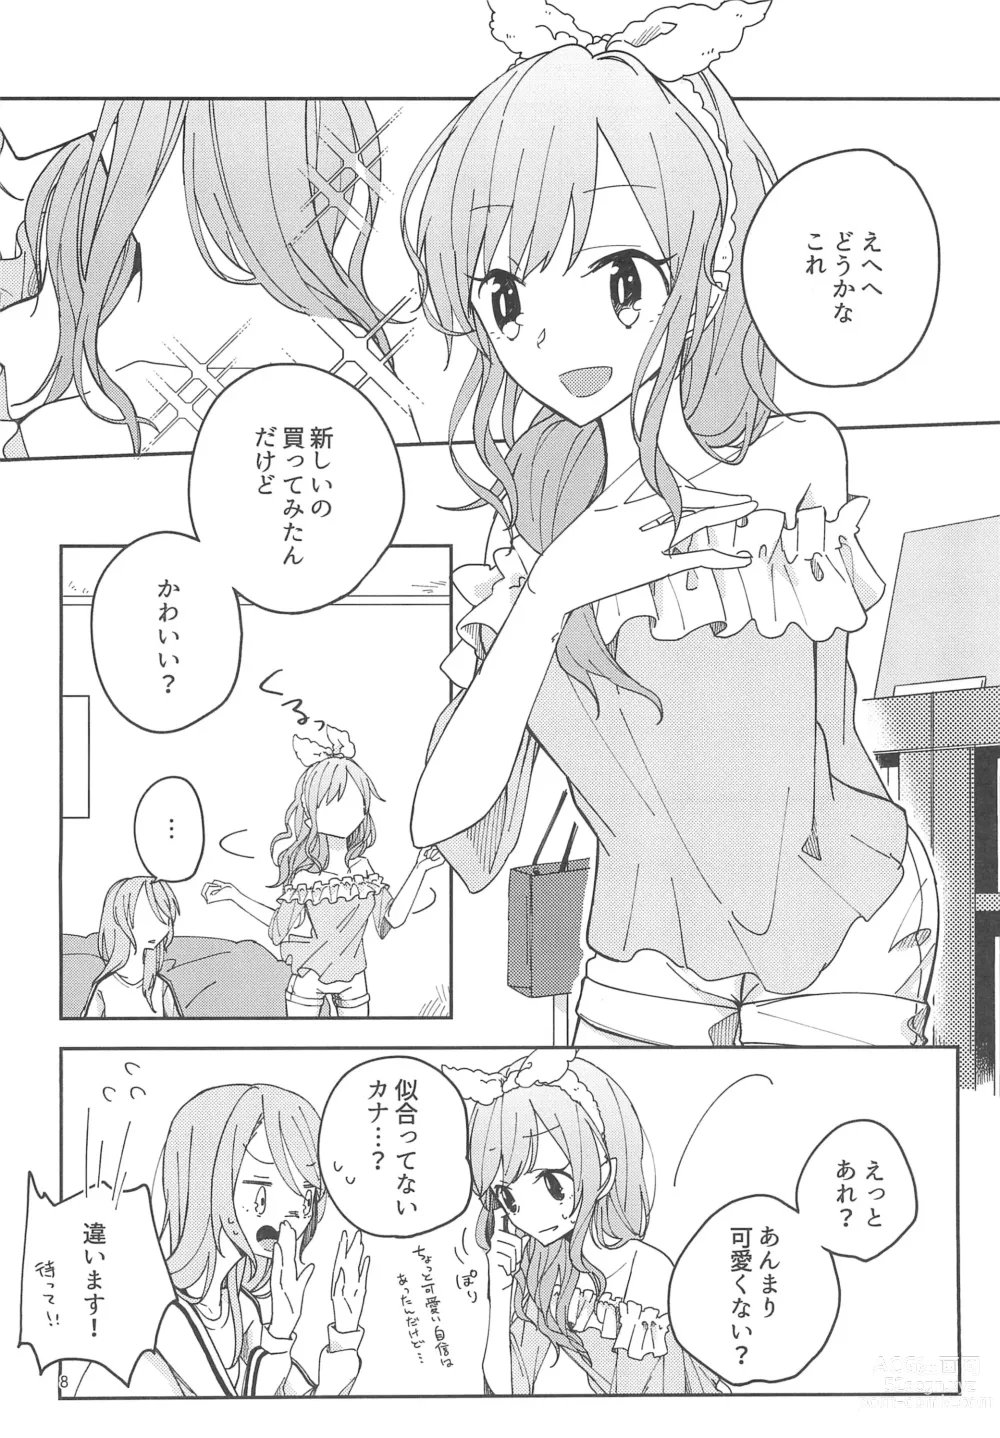 Page 10 of doujinshi I’m crazy about you.